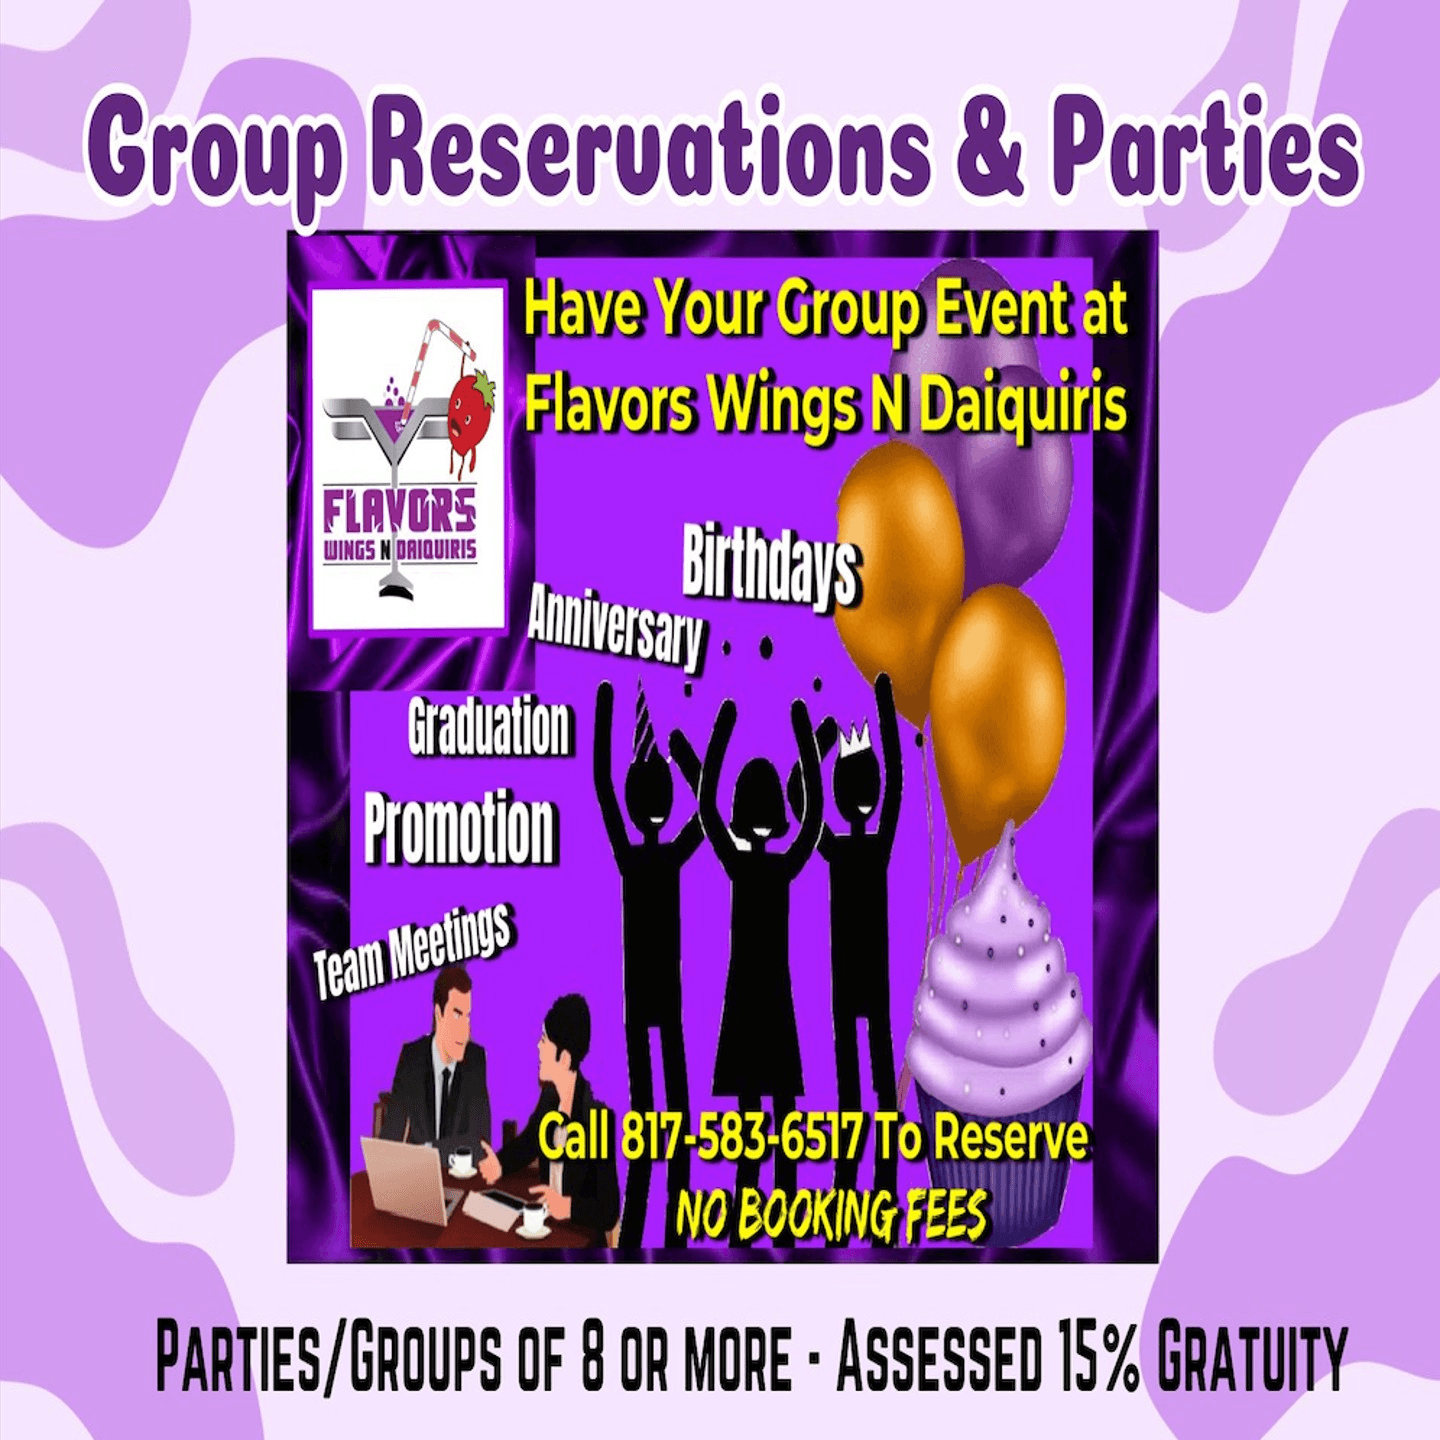 Have your Group Event at Flavors!